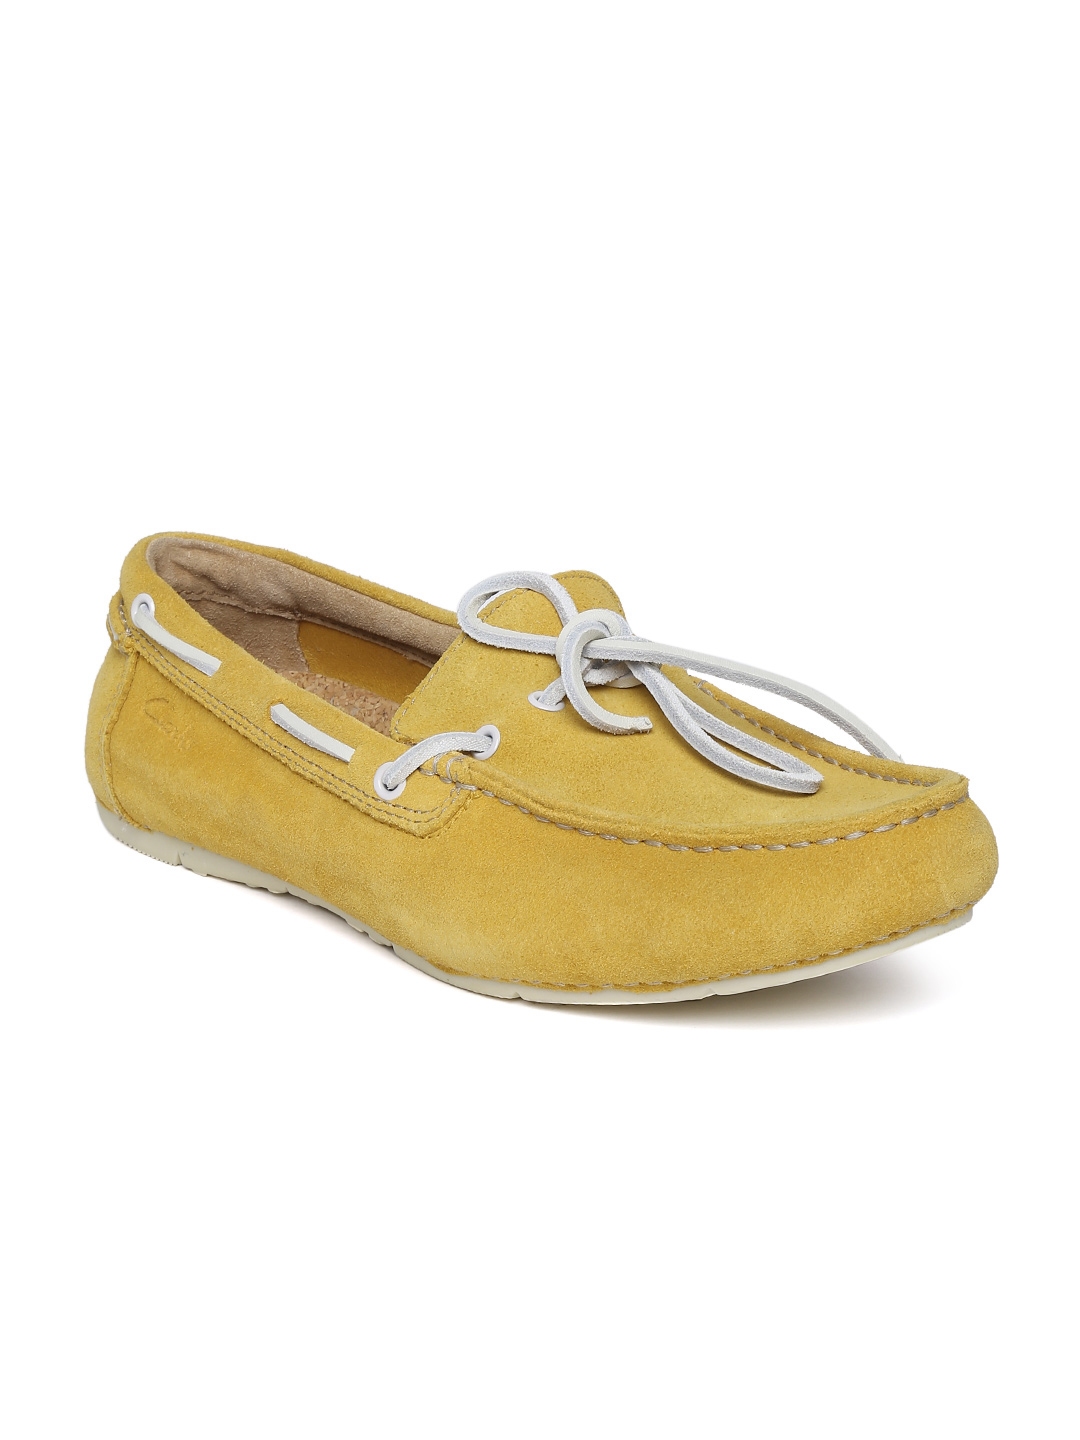 Buy Clarks Men Mustard Yellow Suede Boat Shoes - Casual Shoes for Men ...